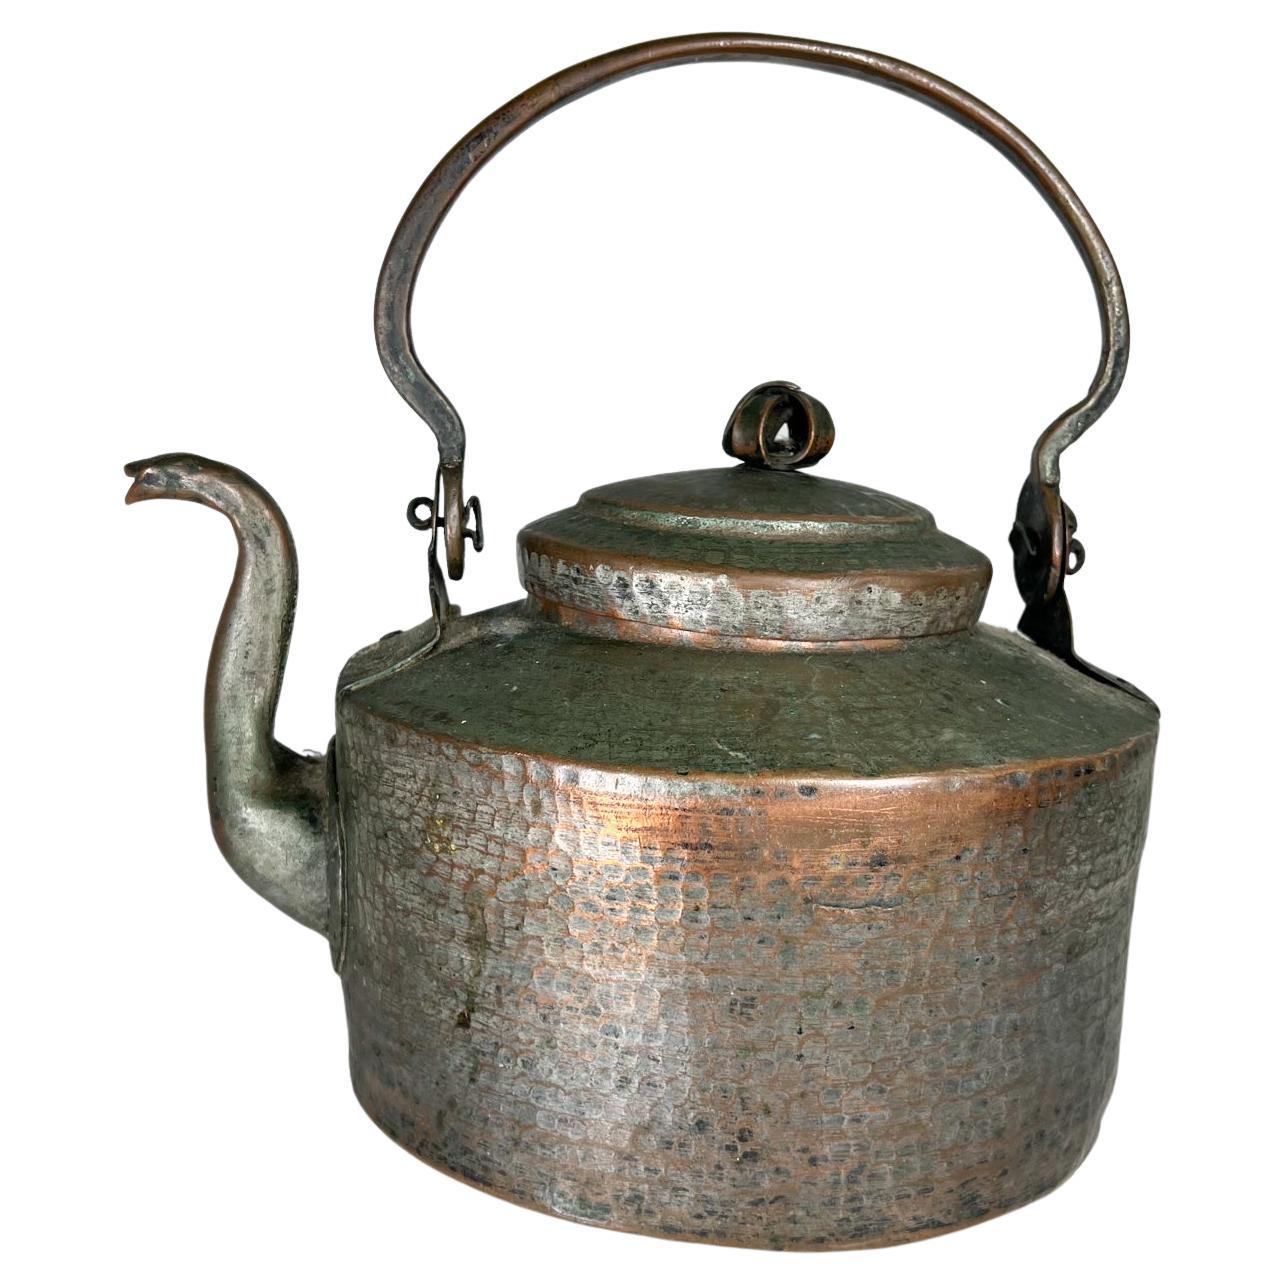 Antique Rustic Hammered Copper Tea Kettle with Flair For Sale